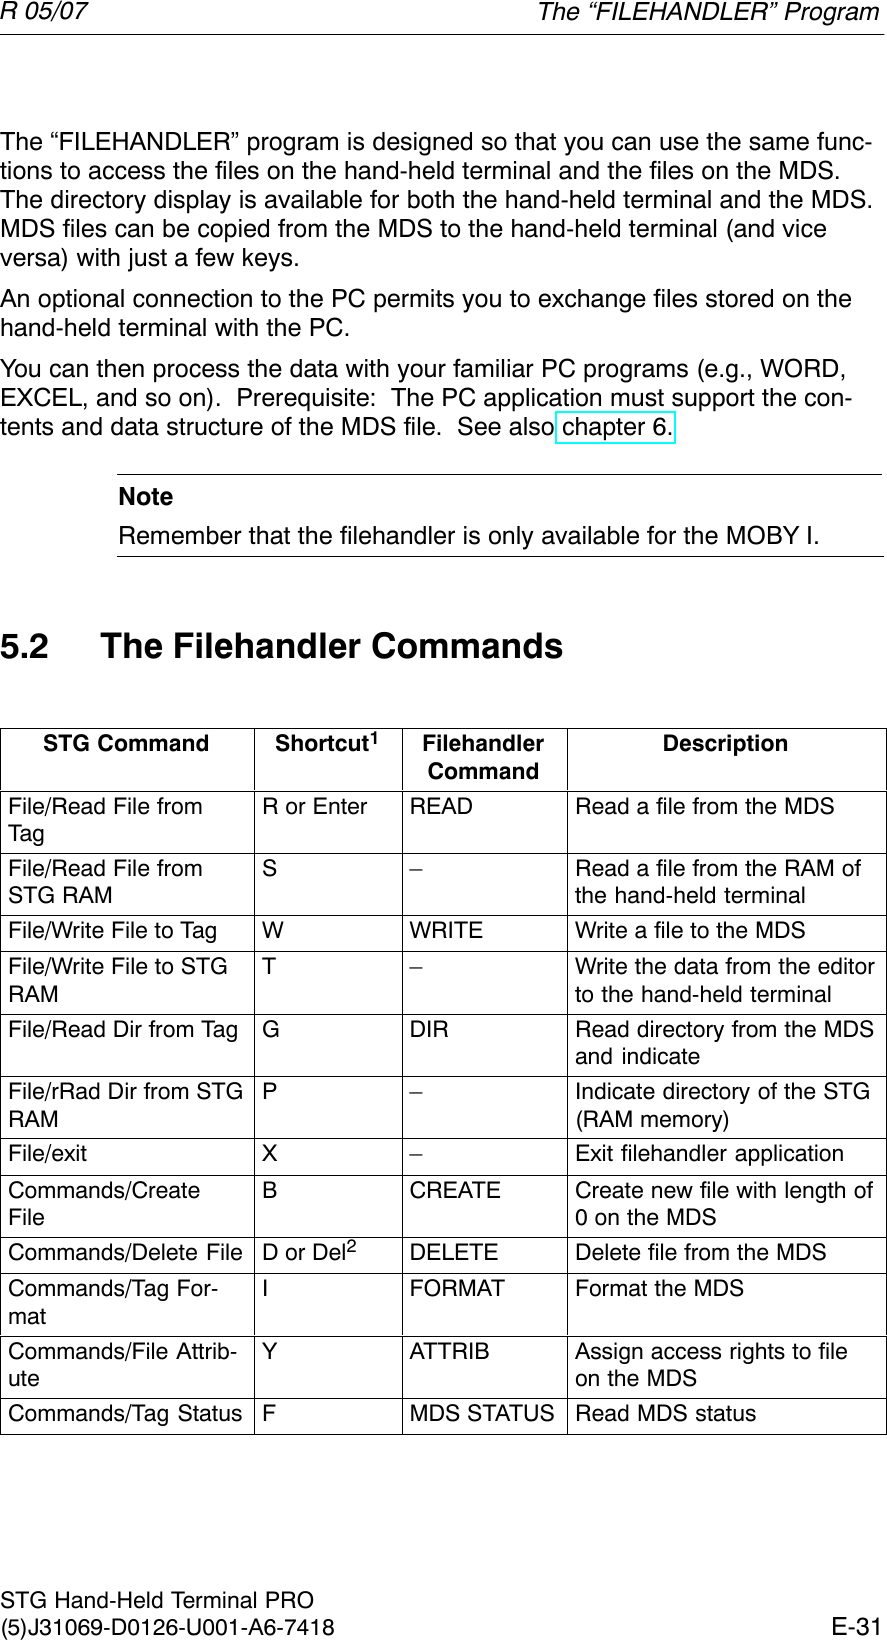 R 05/07E-31STG Hand-Held Terminal PRO(5)J31069-D0126-U001-A6-7418The “FILEHANDLER” program is designed so that you can use the same func-tions to access the files on the hand-held terminal and the files on the MDS.The directory display is available for both the hand-held terminal and the MDS.MDS files can be copied from the MDS to the hand-held terminal (and viceversa) with just a few keys.An optional connection to the PC permits you to exchange files stored on thehand-held terminal with the PC.You can then process the data with your familiar PC programs (e.g., WORD,EXCEL, and so on).  Prerequisite:  The PC application must support the con-tents and data structure of the MDS file.  See also chapter 6.NoteRemember that the filehandler is only available for the MOBY I.5.2 The Filehandler CommandsSTG Command Shortcut1FilehandlerCommandDescriptionFile/Read File fromTagR or Enter READ Read a file from the MDSFile/Read File fromSTG RAMS – Read a file from the RAM ofthe hand-held terminalFile/Write File to Tag W WRITE Write a file to the MDSFile/Write File to STGRAMT – Write the data from the editorto the hand-held terminalFile/Read Dir from Tag G DIR Read directory from the MDSand indicateFile/rRad Dir from STGRAMP – Indicate directory of the STG(RAM memory)File/exit X – Exit filehandler applicationCommands/CreateFileB CREATE Create new file with length of0 on the MDSCommands/Delete File D or Del2DELETE Delete file from the MDSCommands/Tag For-matI FORMAT Format the MDSCommands/File Attrib-uteY ATTRIB Assign access rights to fileon the MDSCommands/Tag Status FMDS STATUS Read MDS statusThe “FILEHANDLER” Program